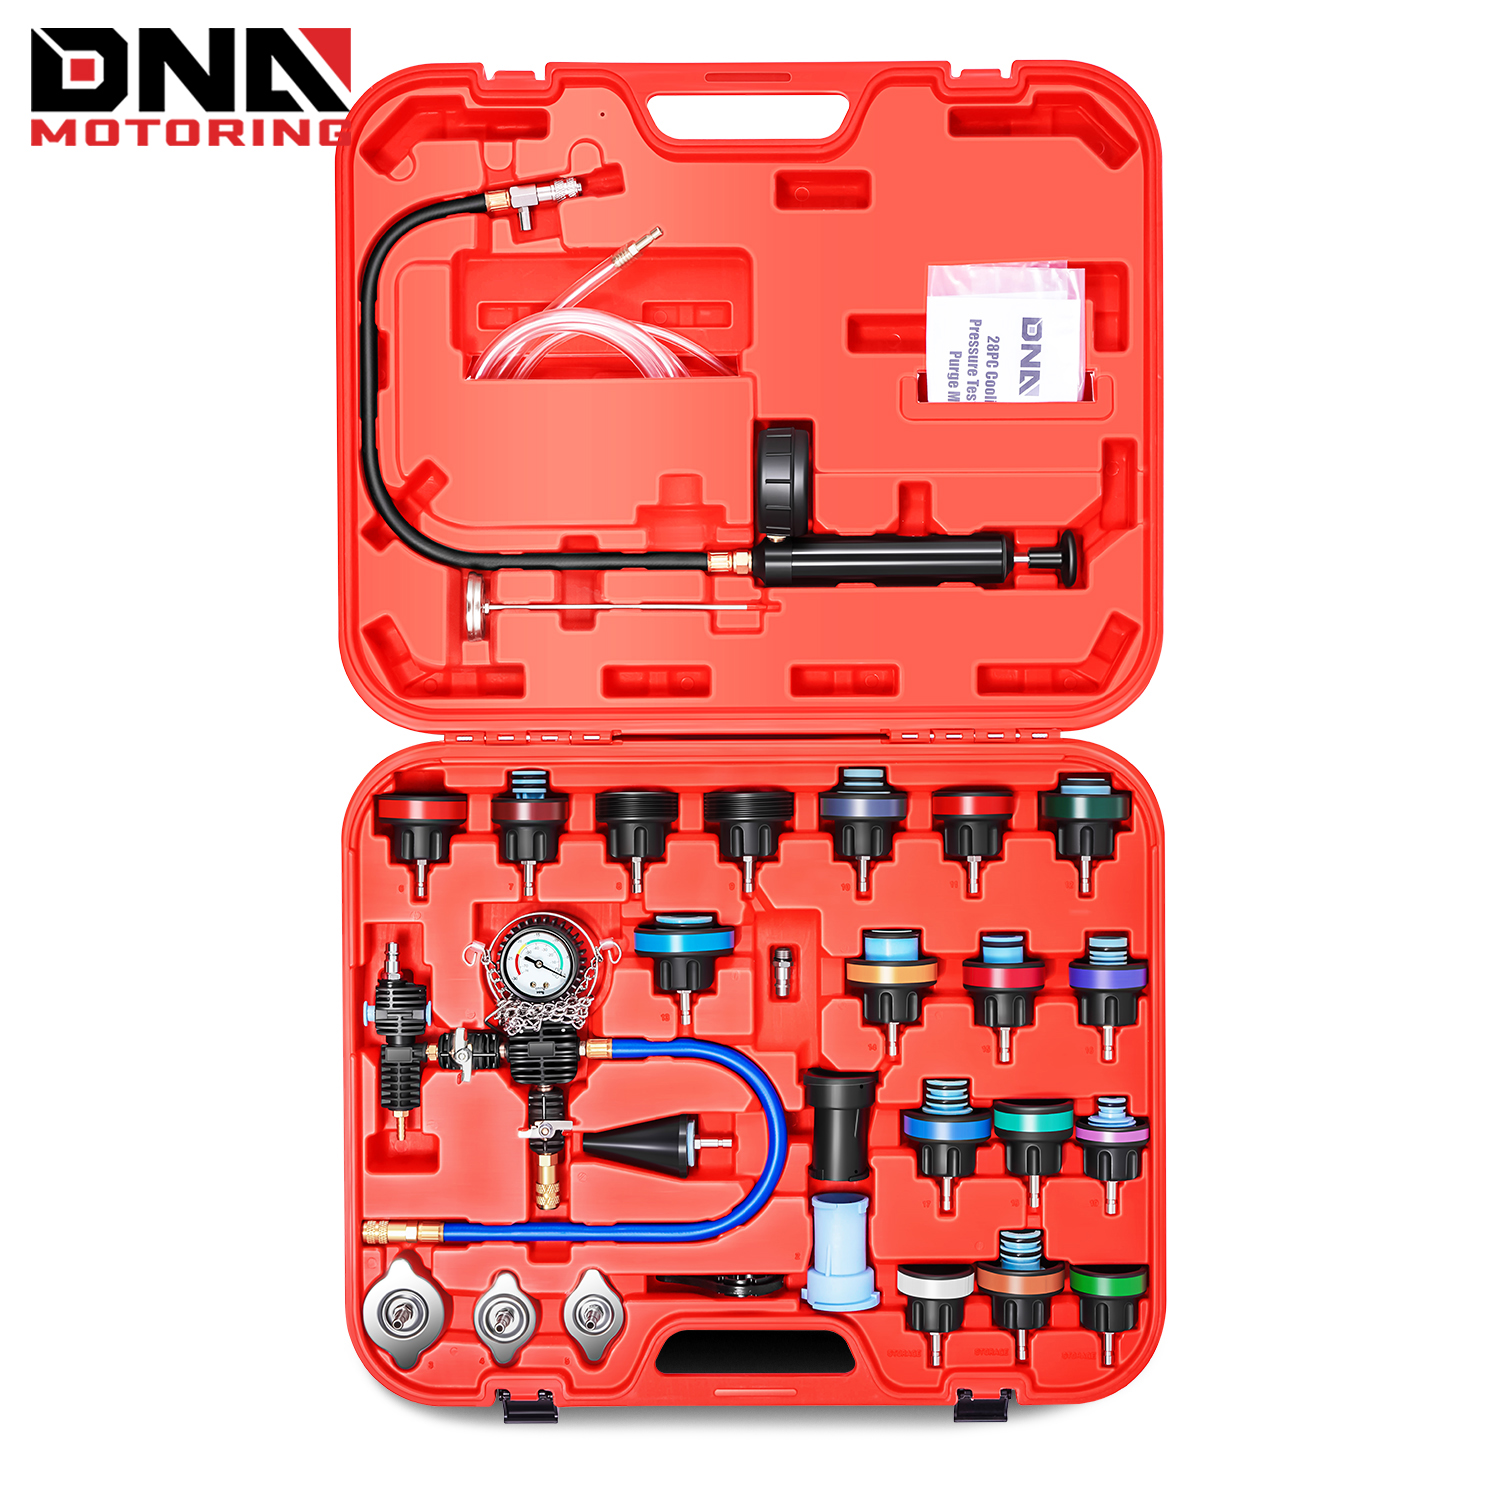 

28pcs Radiator Coolant Pressure Tester Vacuum Refill Tool Kit For Most Vehicles,with Carrying Case